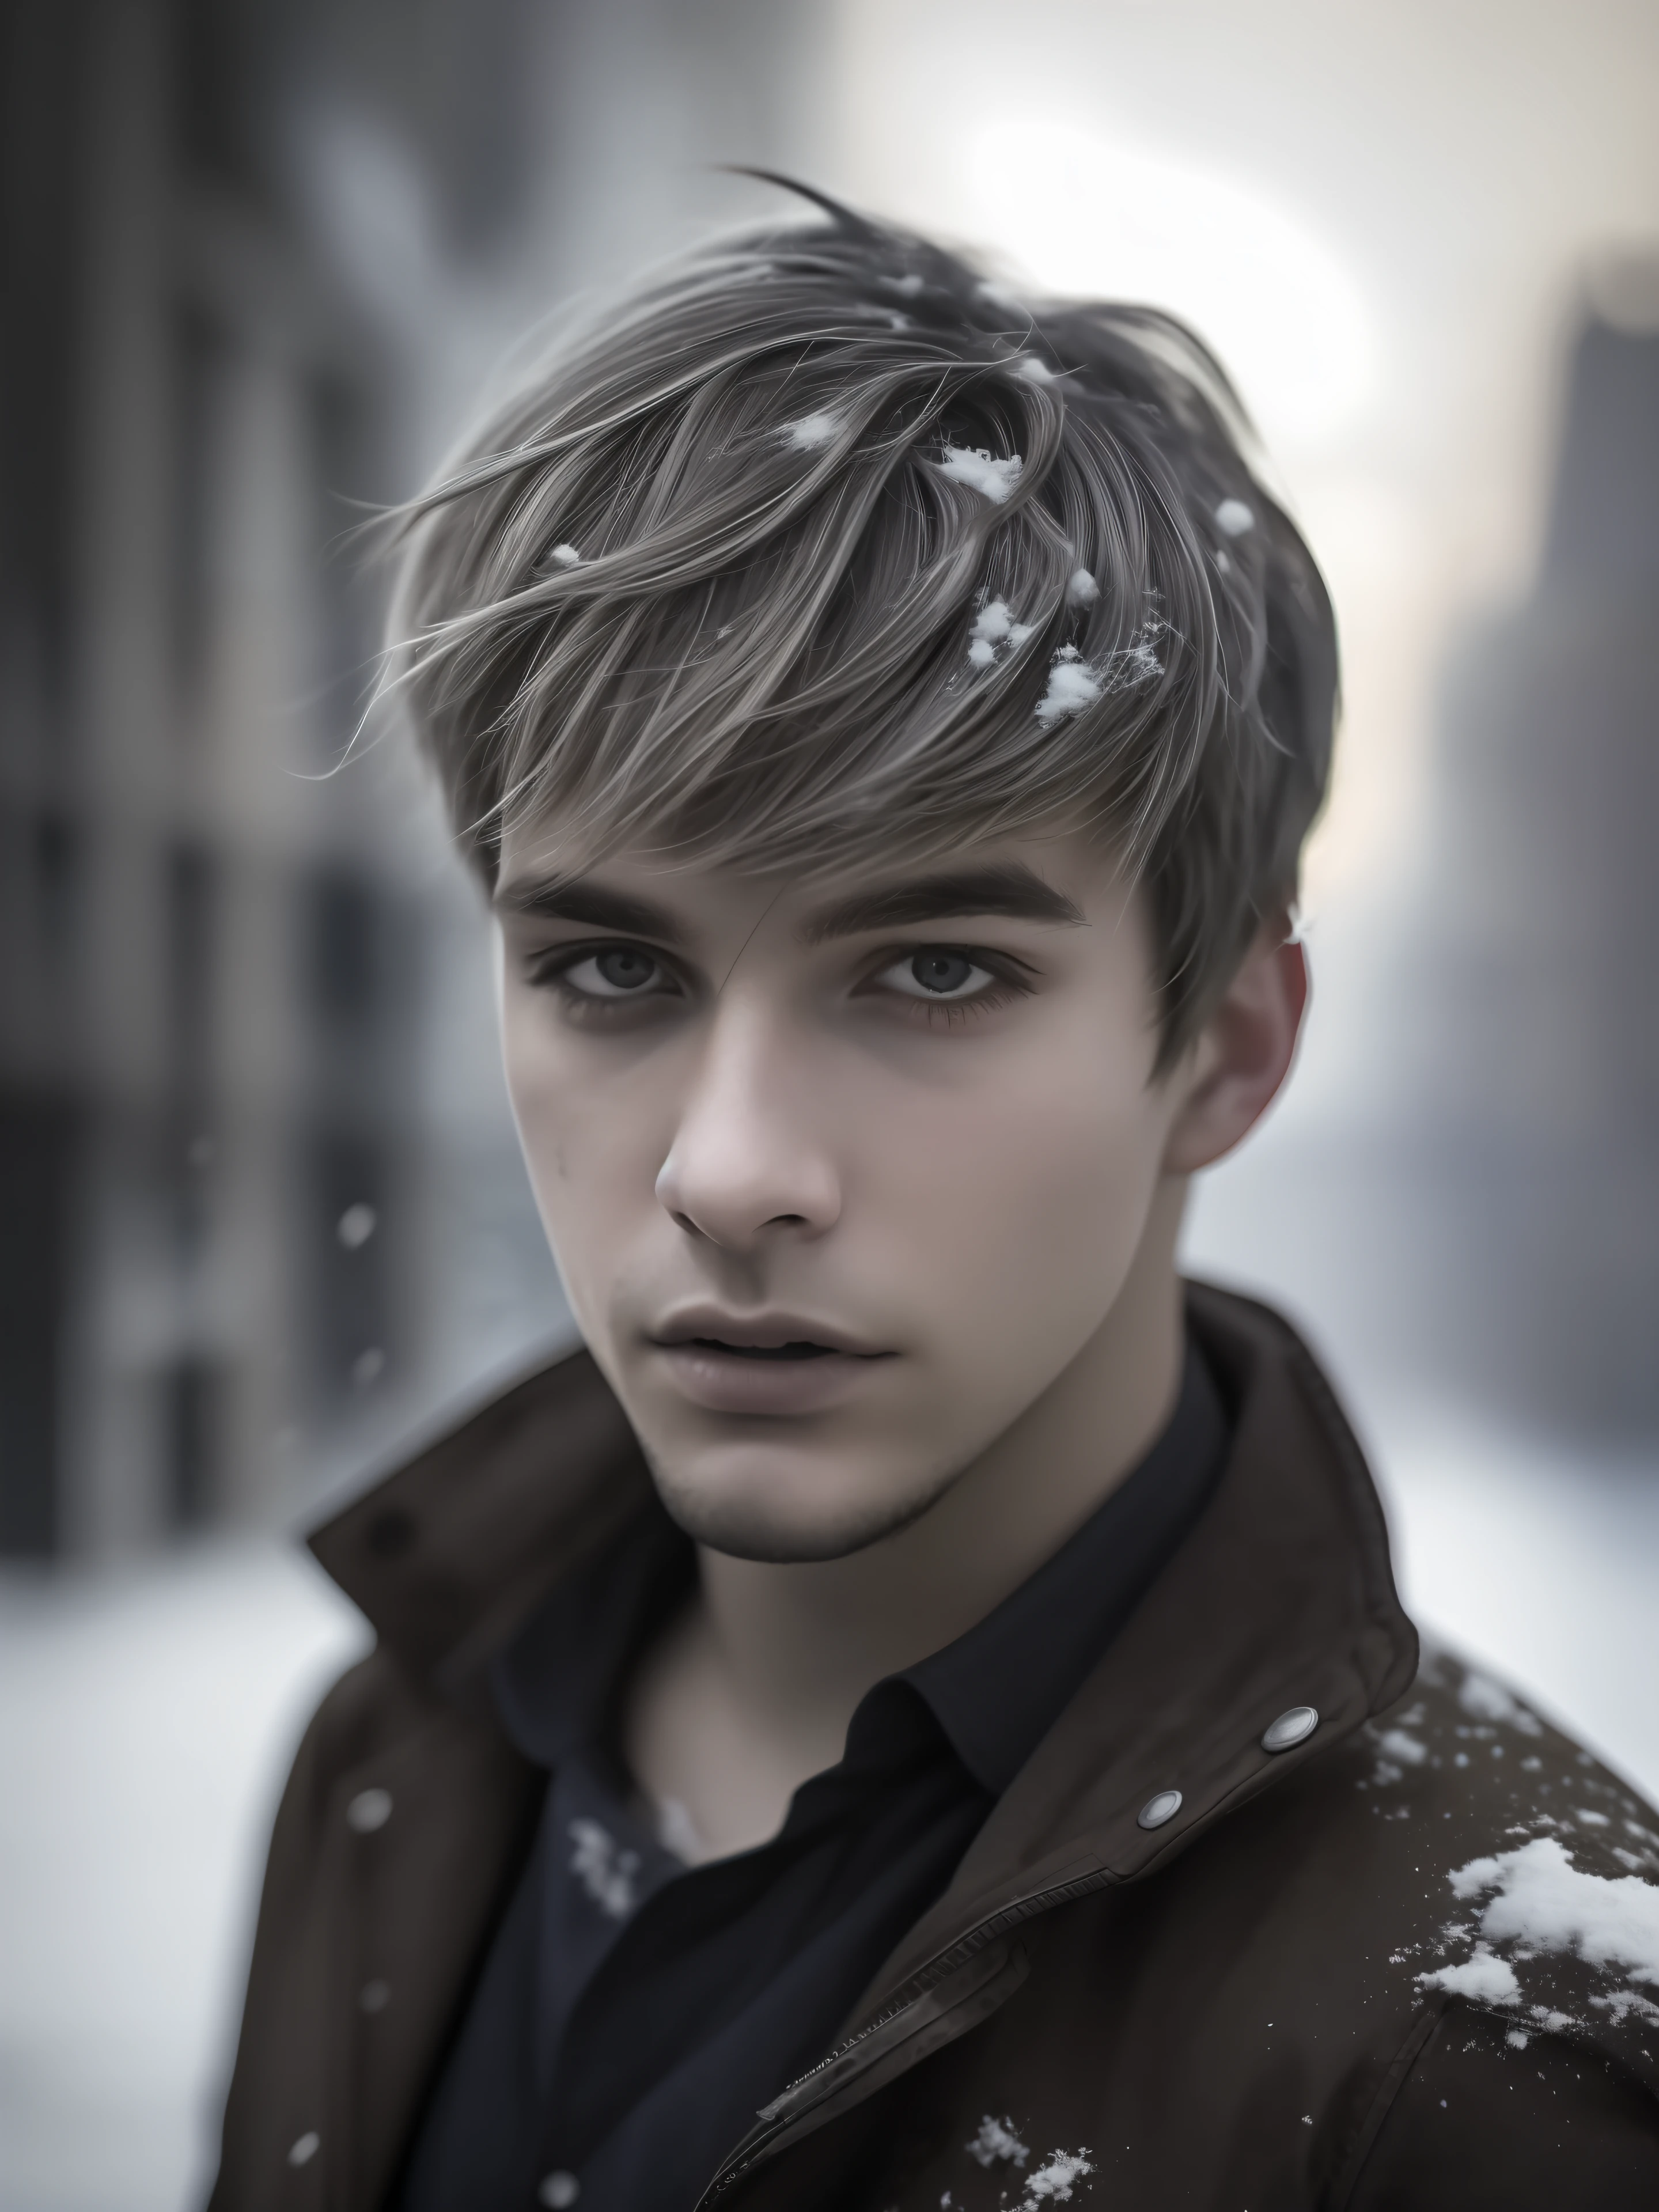 Realistic photography, close-up of dirty young guy aged 15, gray hair, eye focus, 50mm f/1.4, HDR masterpiece, spectacular lighting, epic image, hair in the wind, skin, light snow, post-apocalyptic city, year 2590